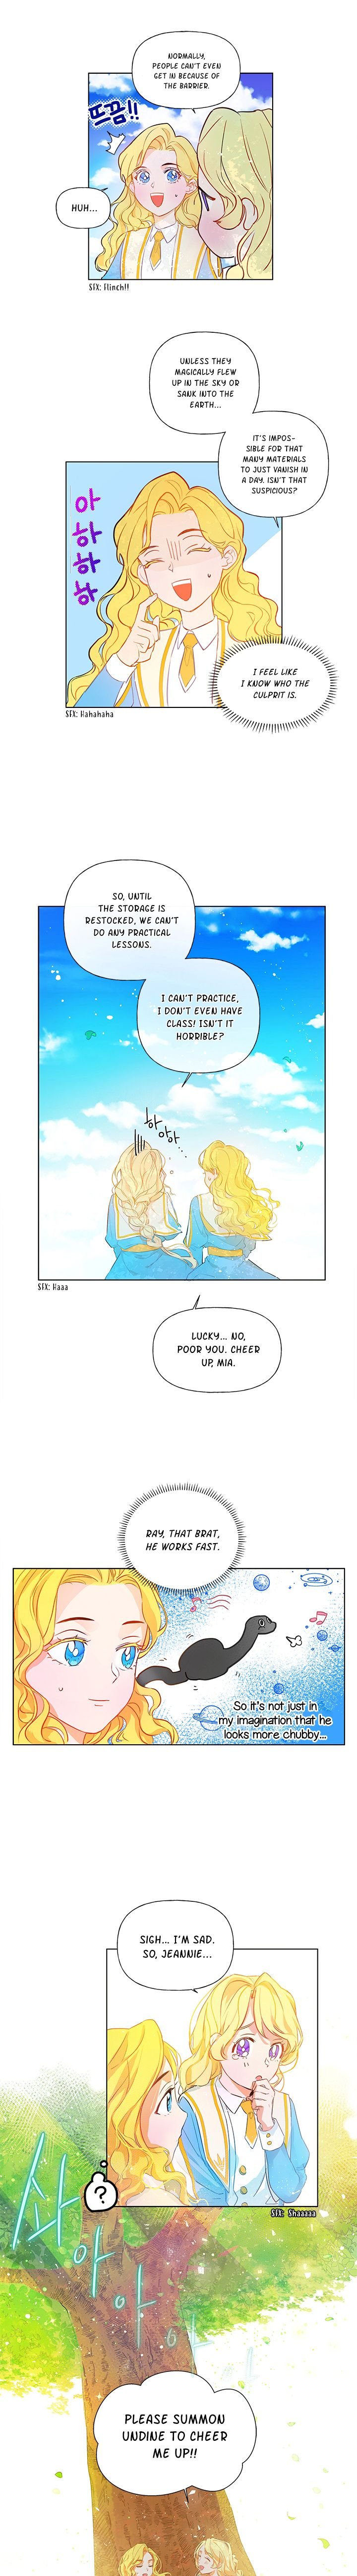 the-golden-haired-elementalist-chap-9-4